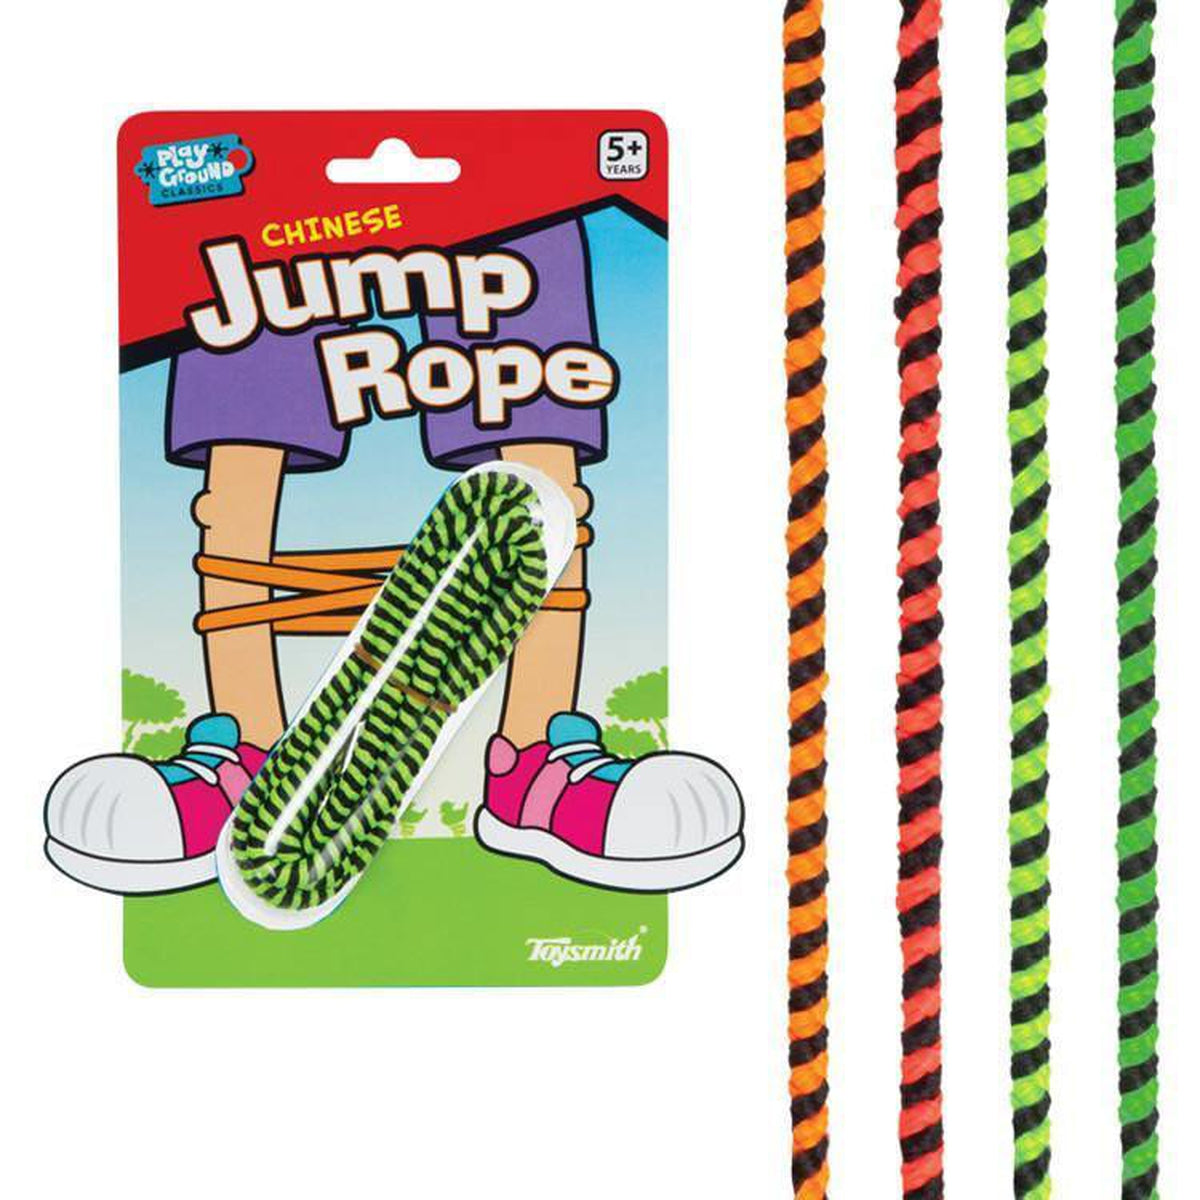 https://cdn.shopify.com/s/files/1/0180/5721/products/chinese-jump-rope-outdoor-clementinestortz.jpg?v=1625607776